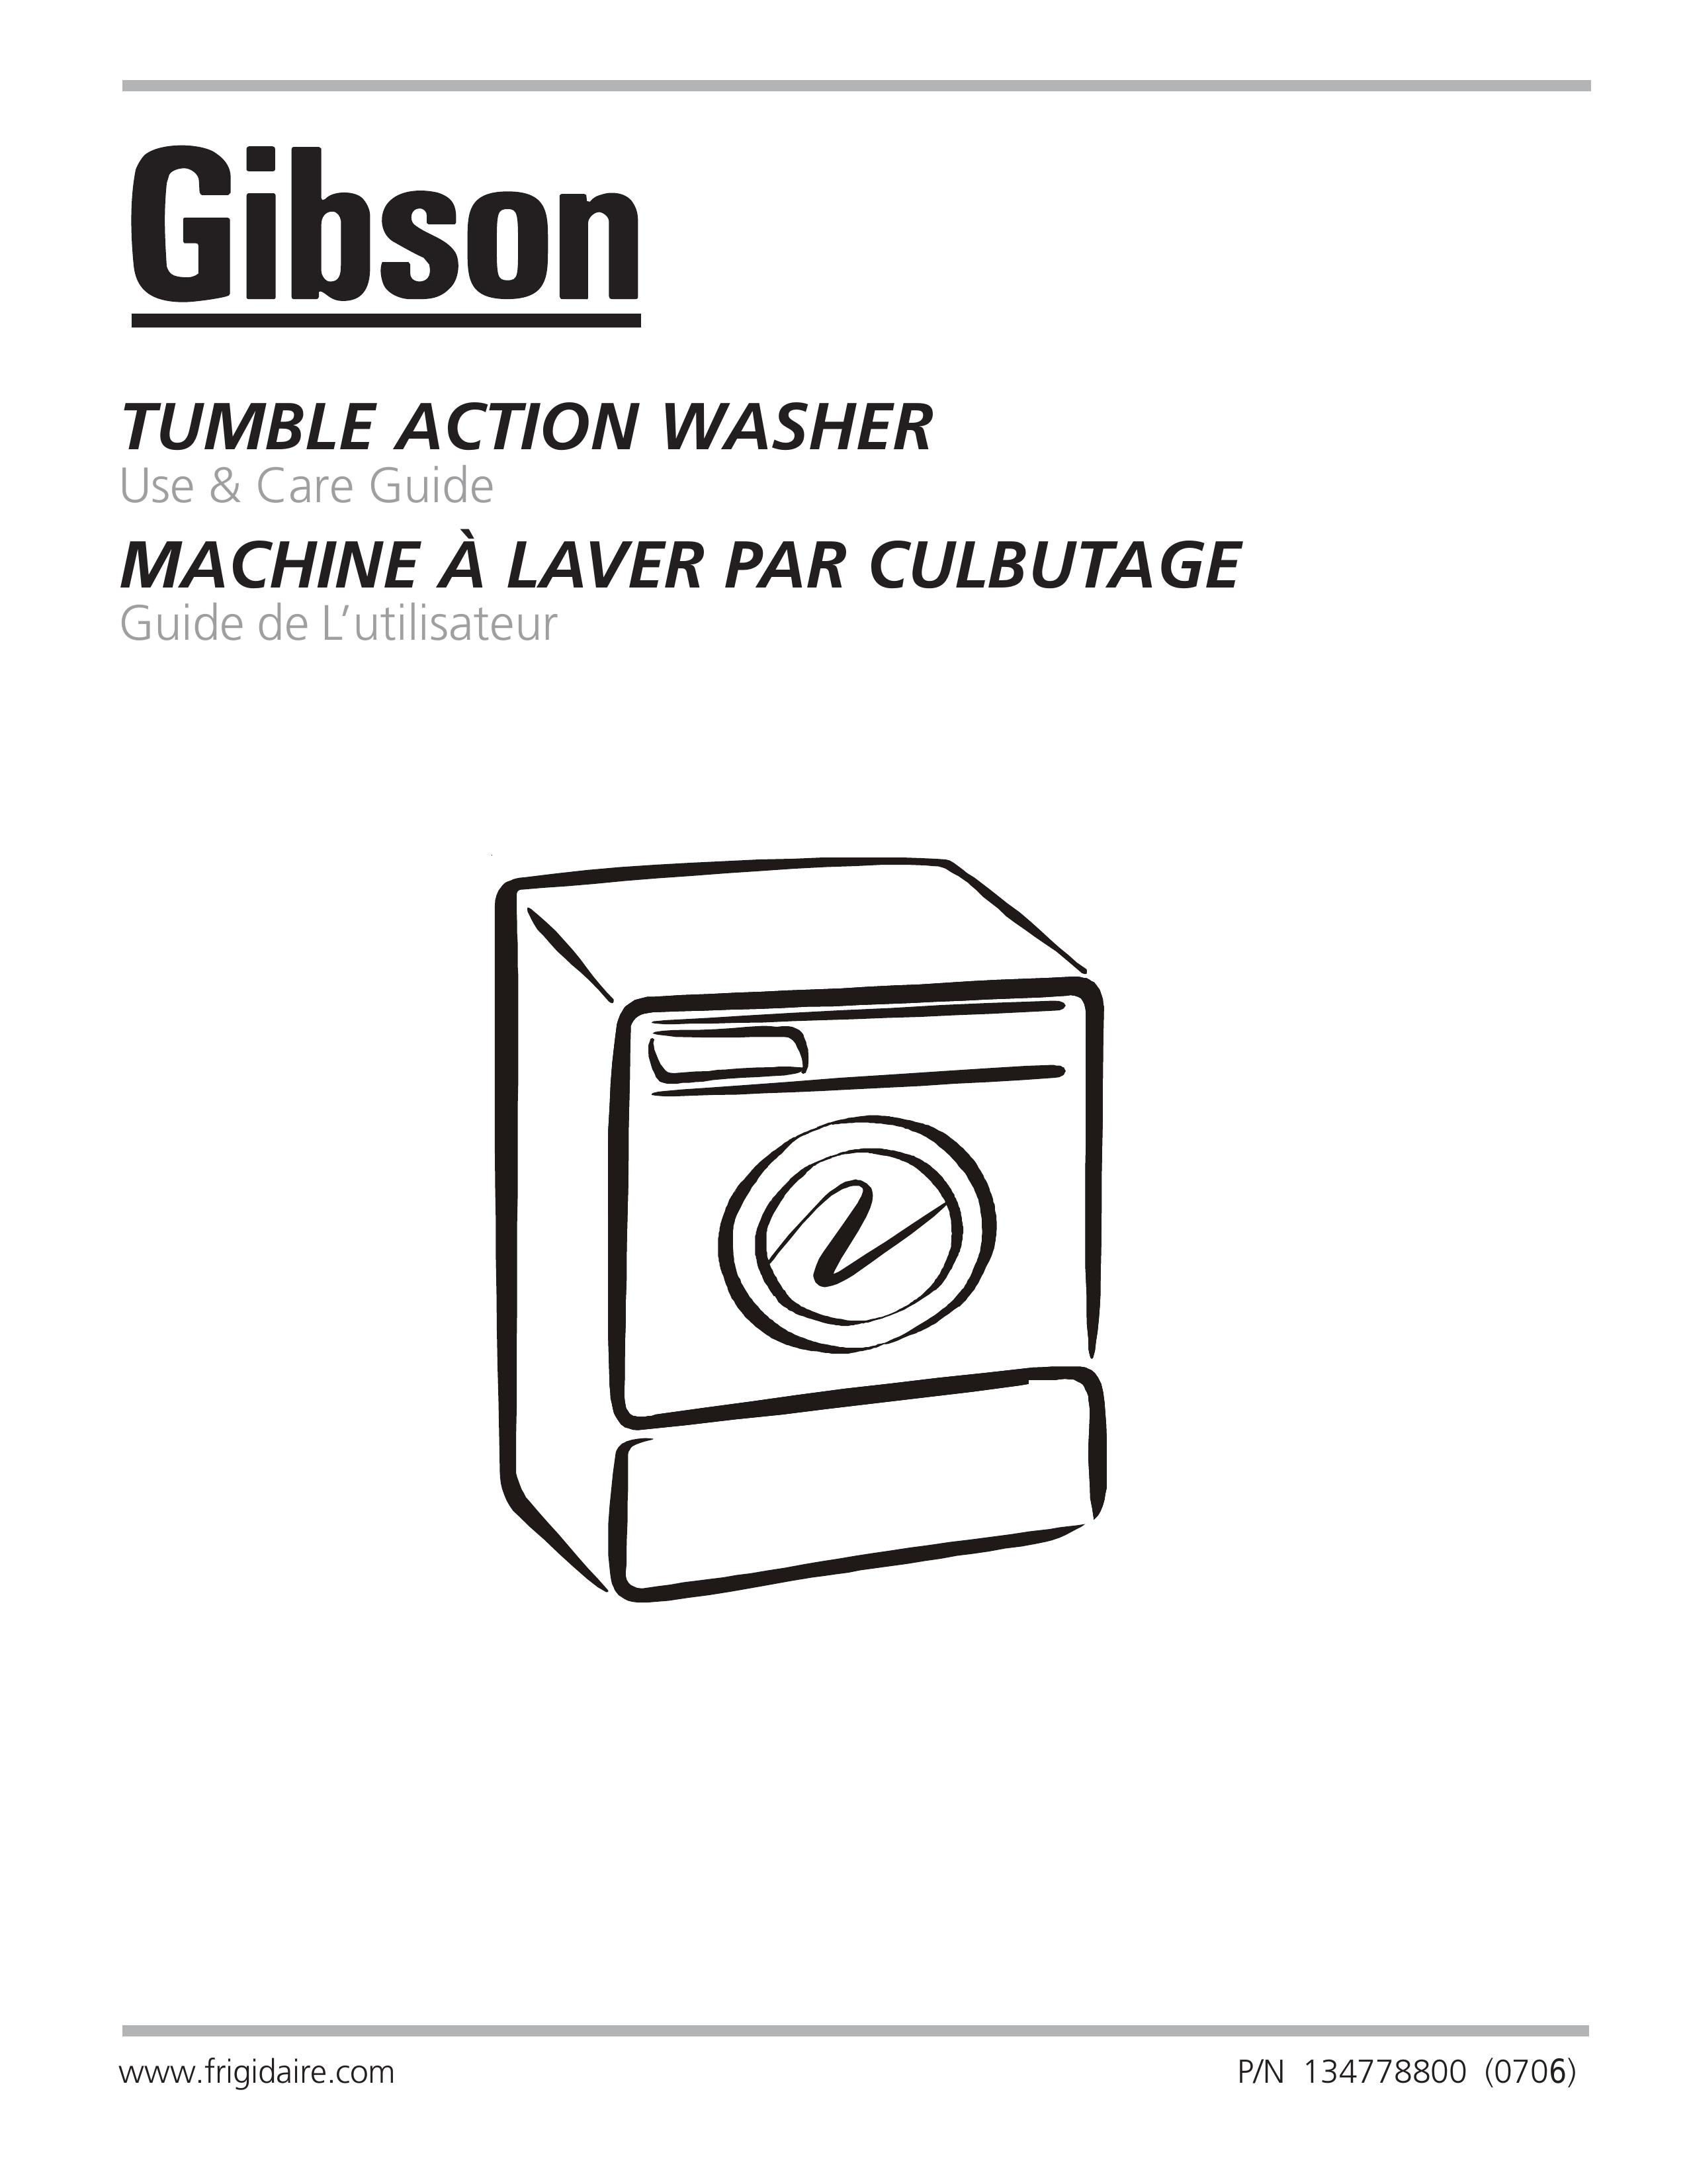 Electrolux - Gibson 134778800 Washer User Manual